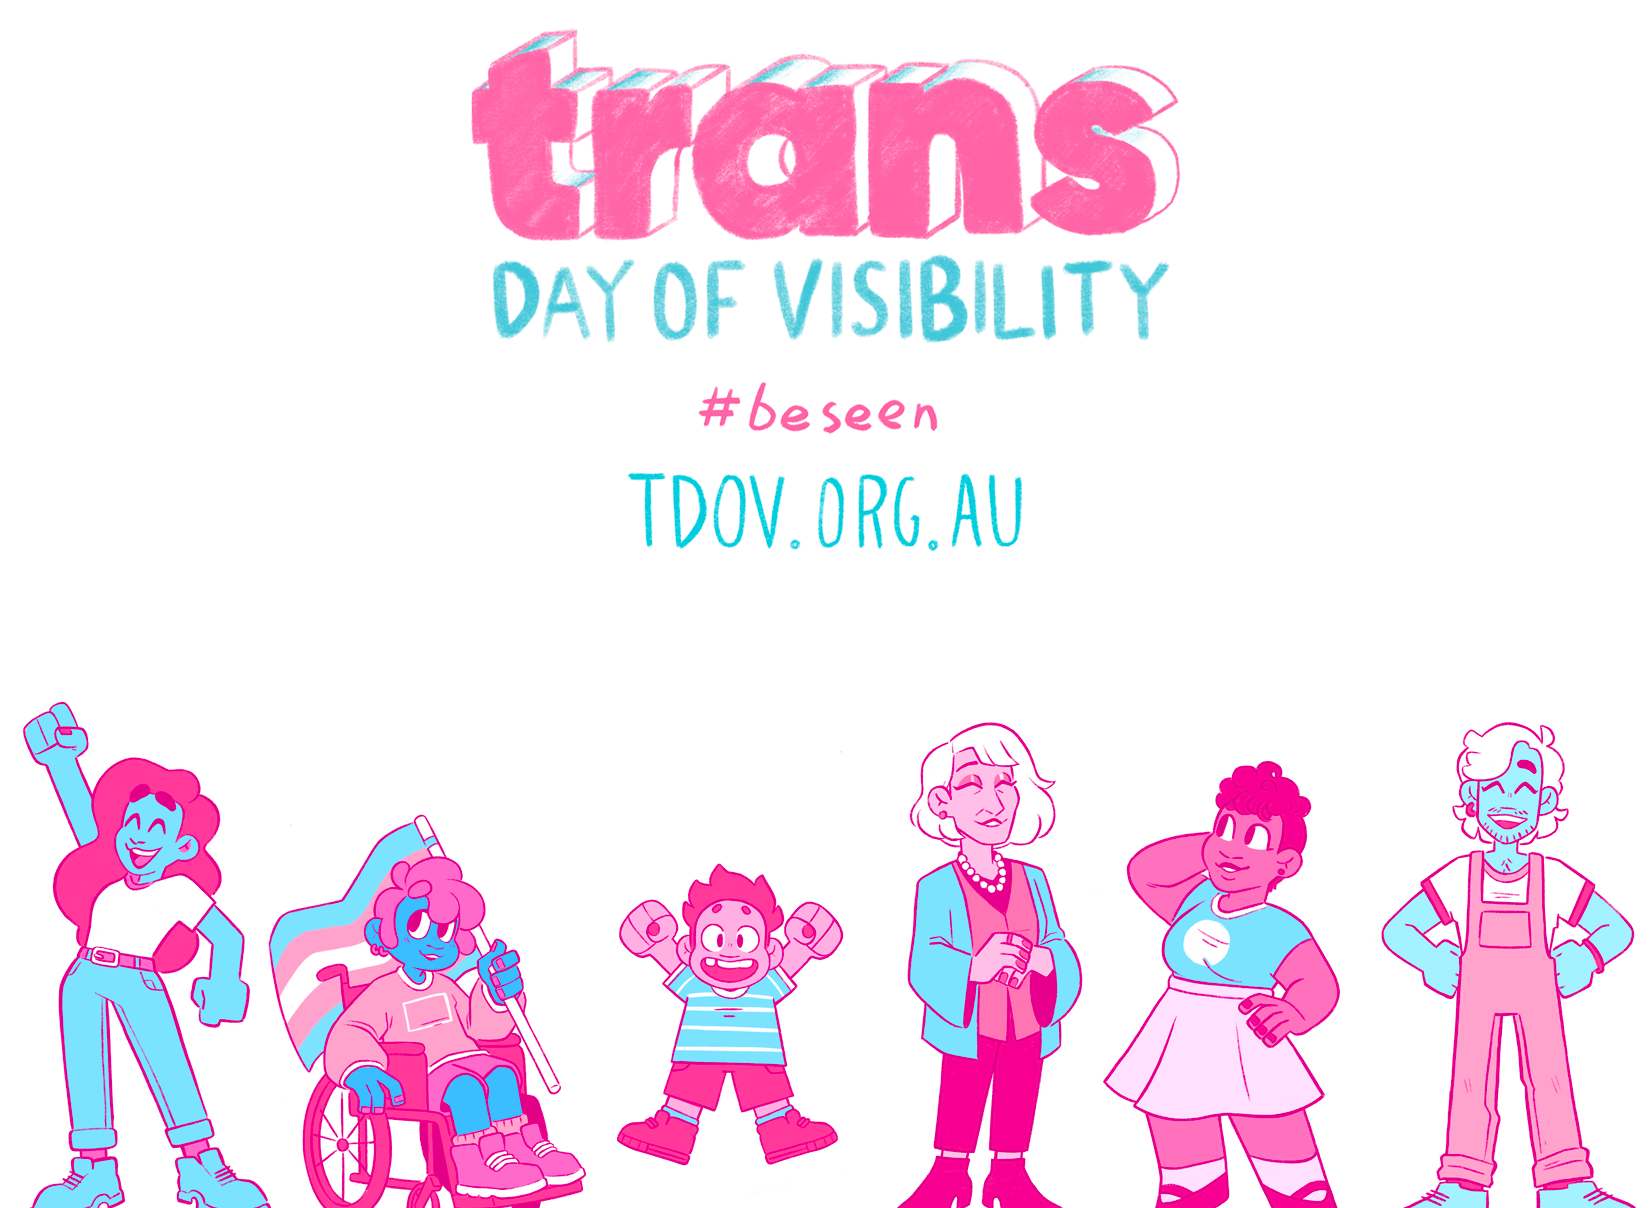 Poster from Transgender Victoria. (Copy)